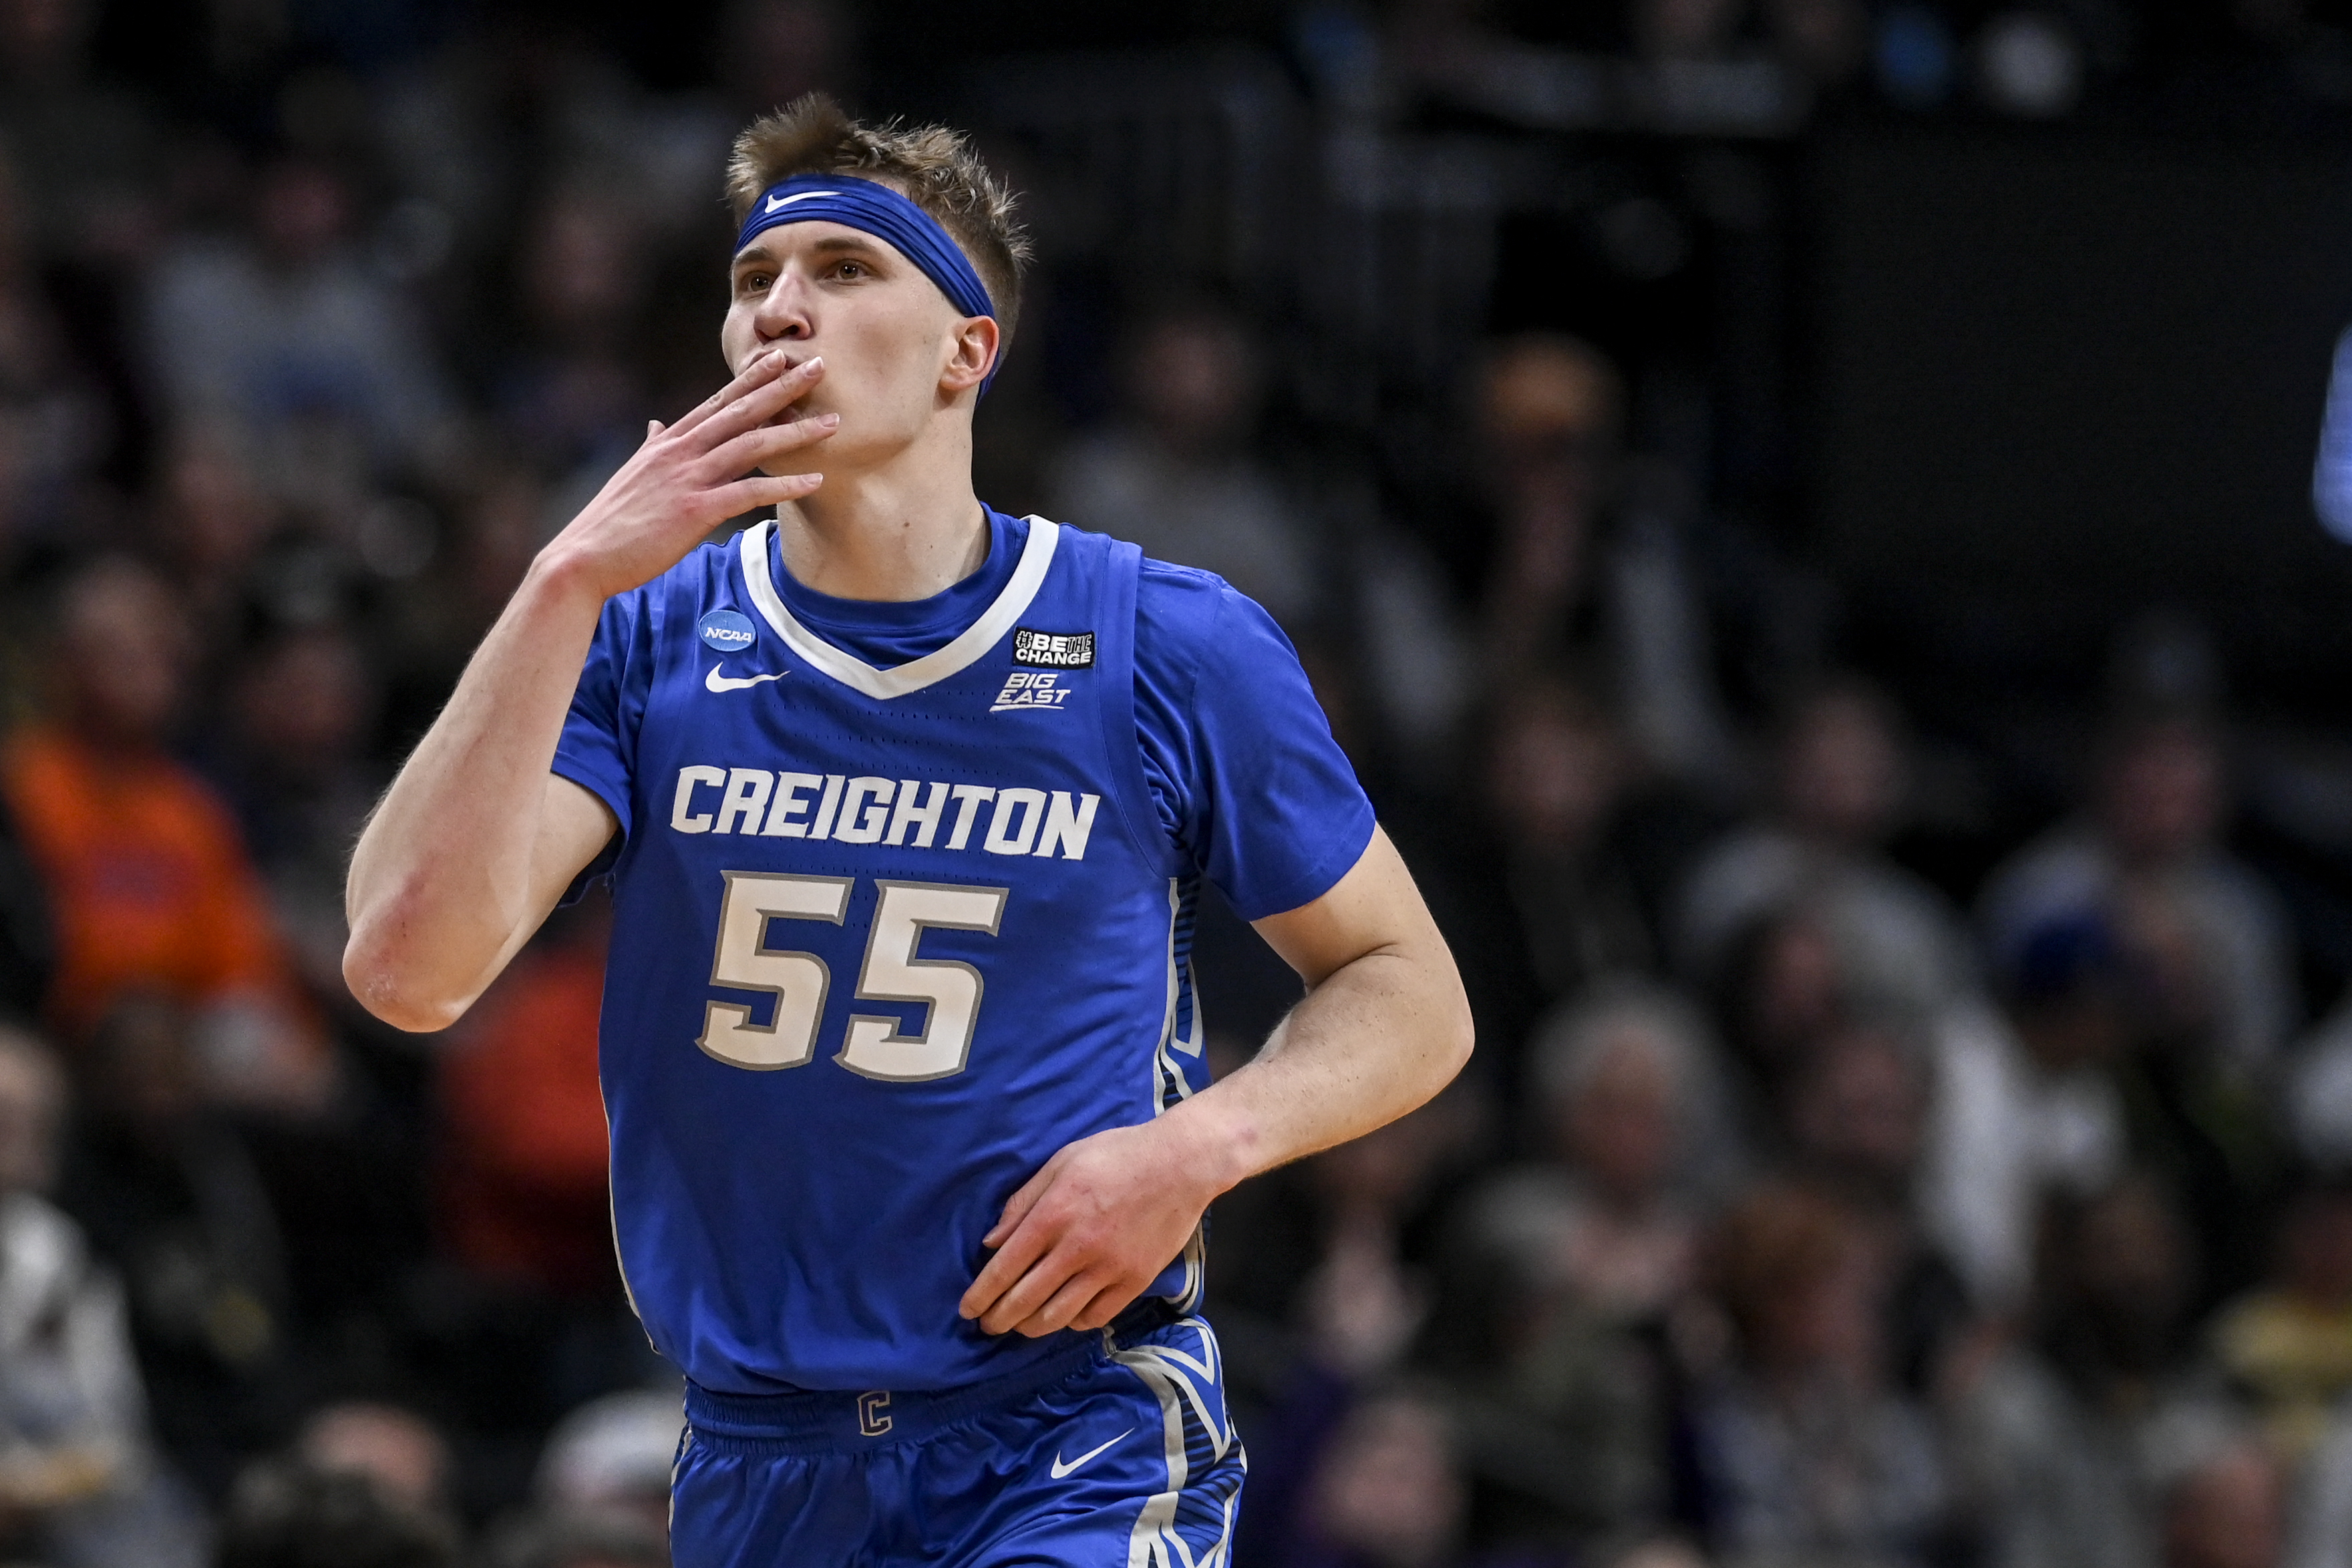 Baylor Scheierman (55) of the Creighton Bluejays celebrates a three against the Baylor Bears during the first half of their second round NCAA men's basketball tournament game at Ball Arena in Denver on Sunday, March 19, 2023. (Photo by AAron Ontiveroz/The Denver Post)